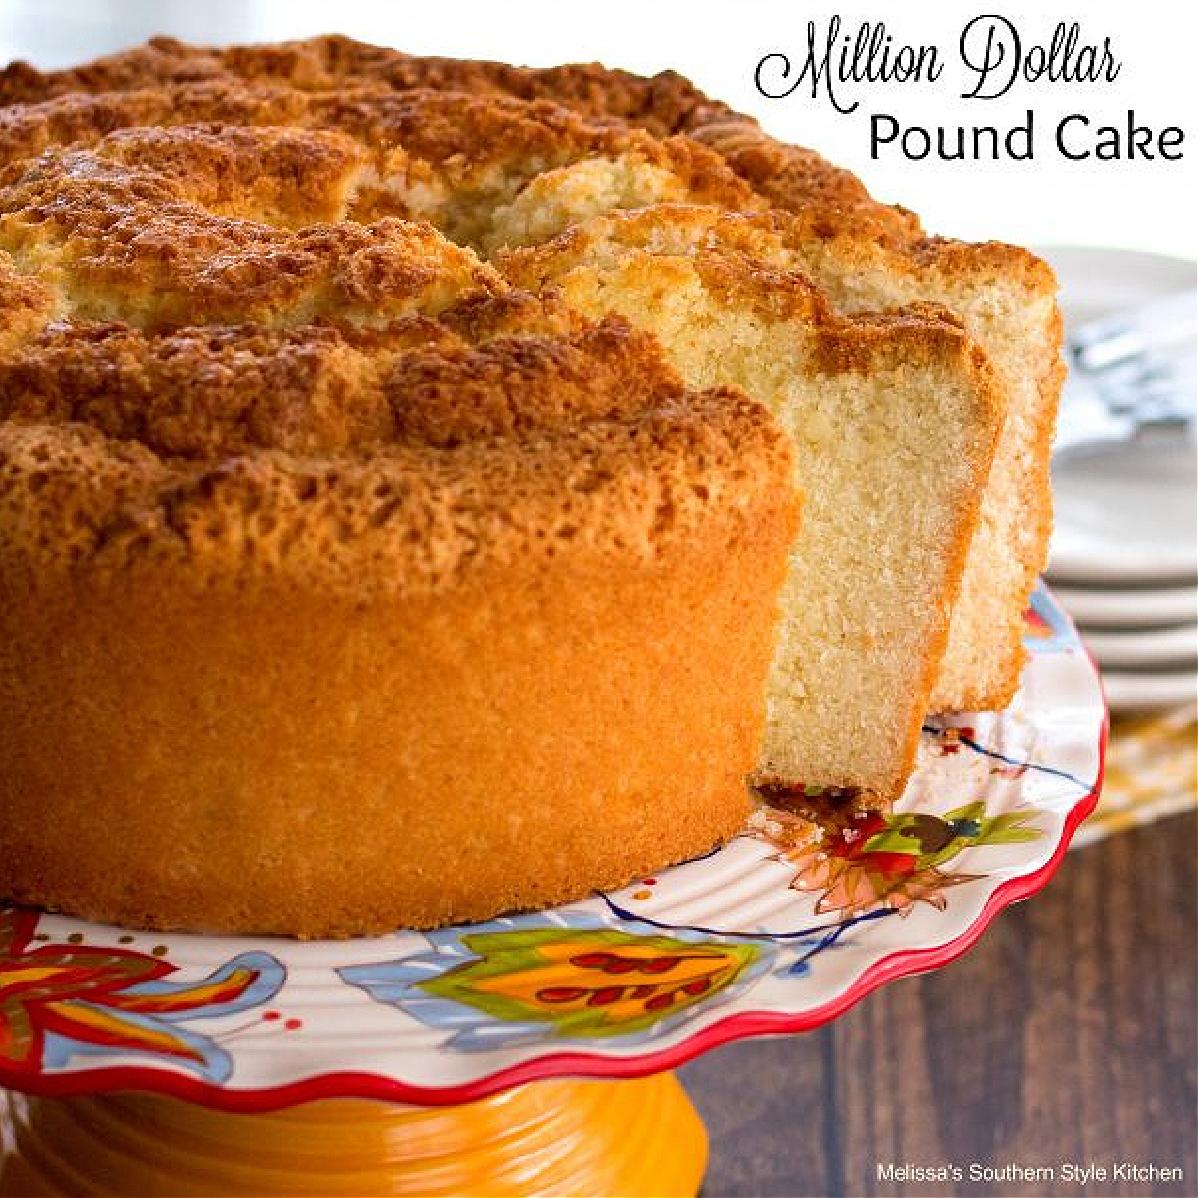  This cake is so buttery and rich, you won't be able to resist a second slice.